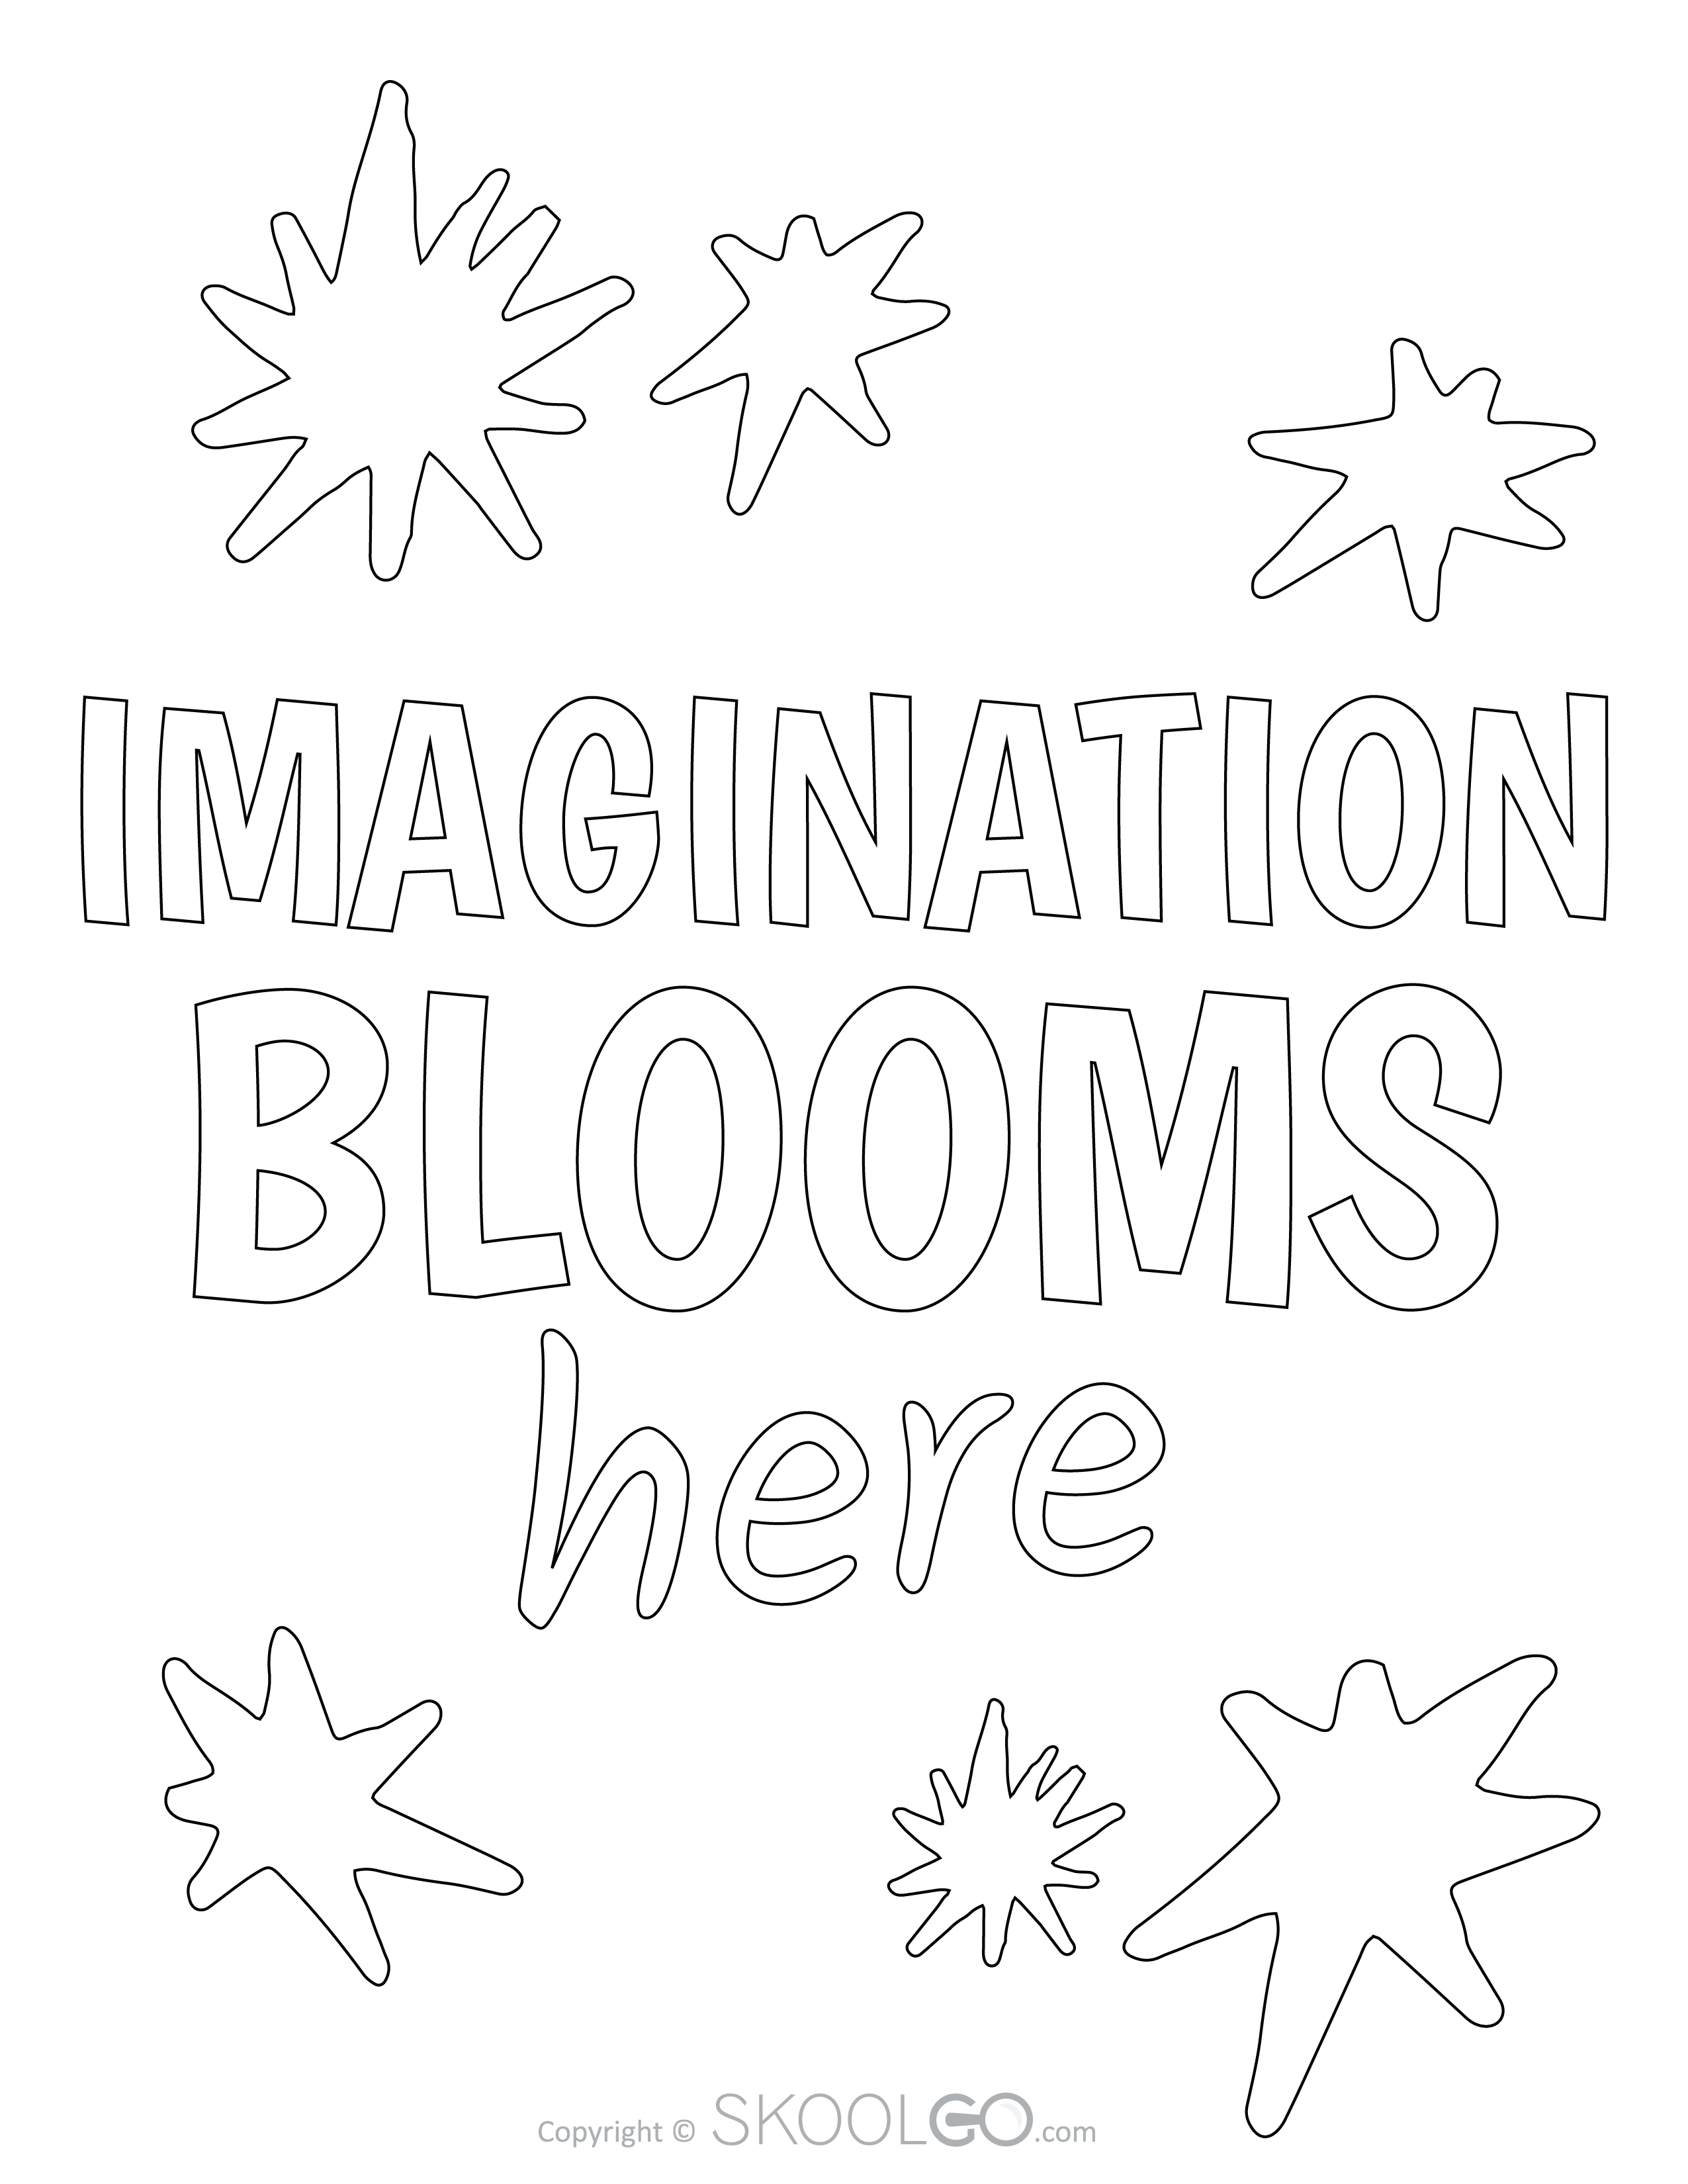 Imagination Blooms Here - Free Coloring Version Poster